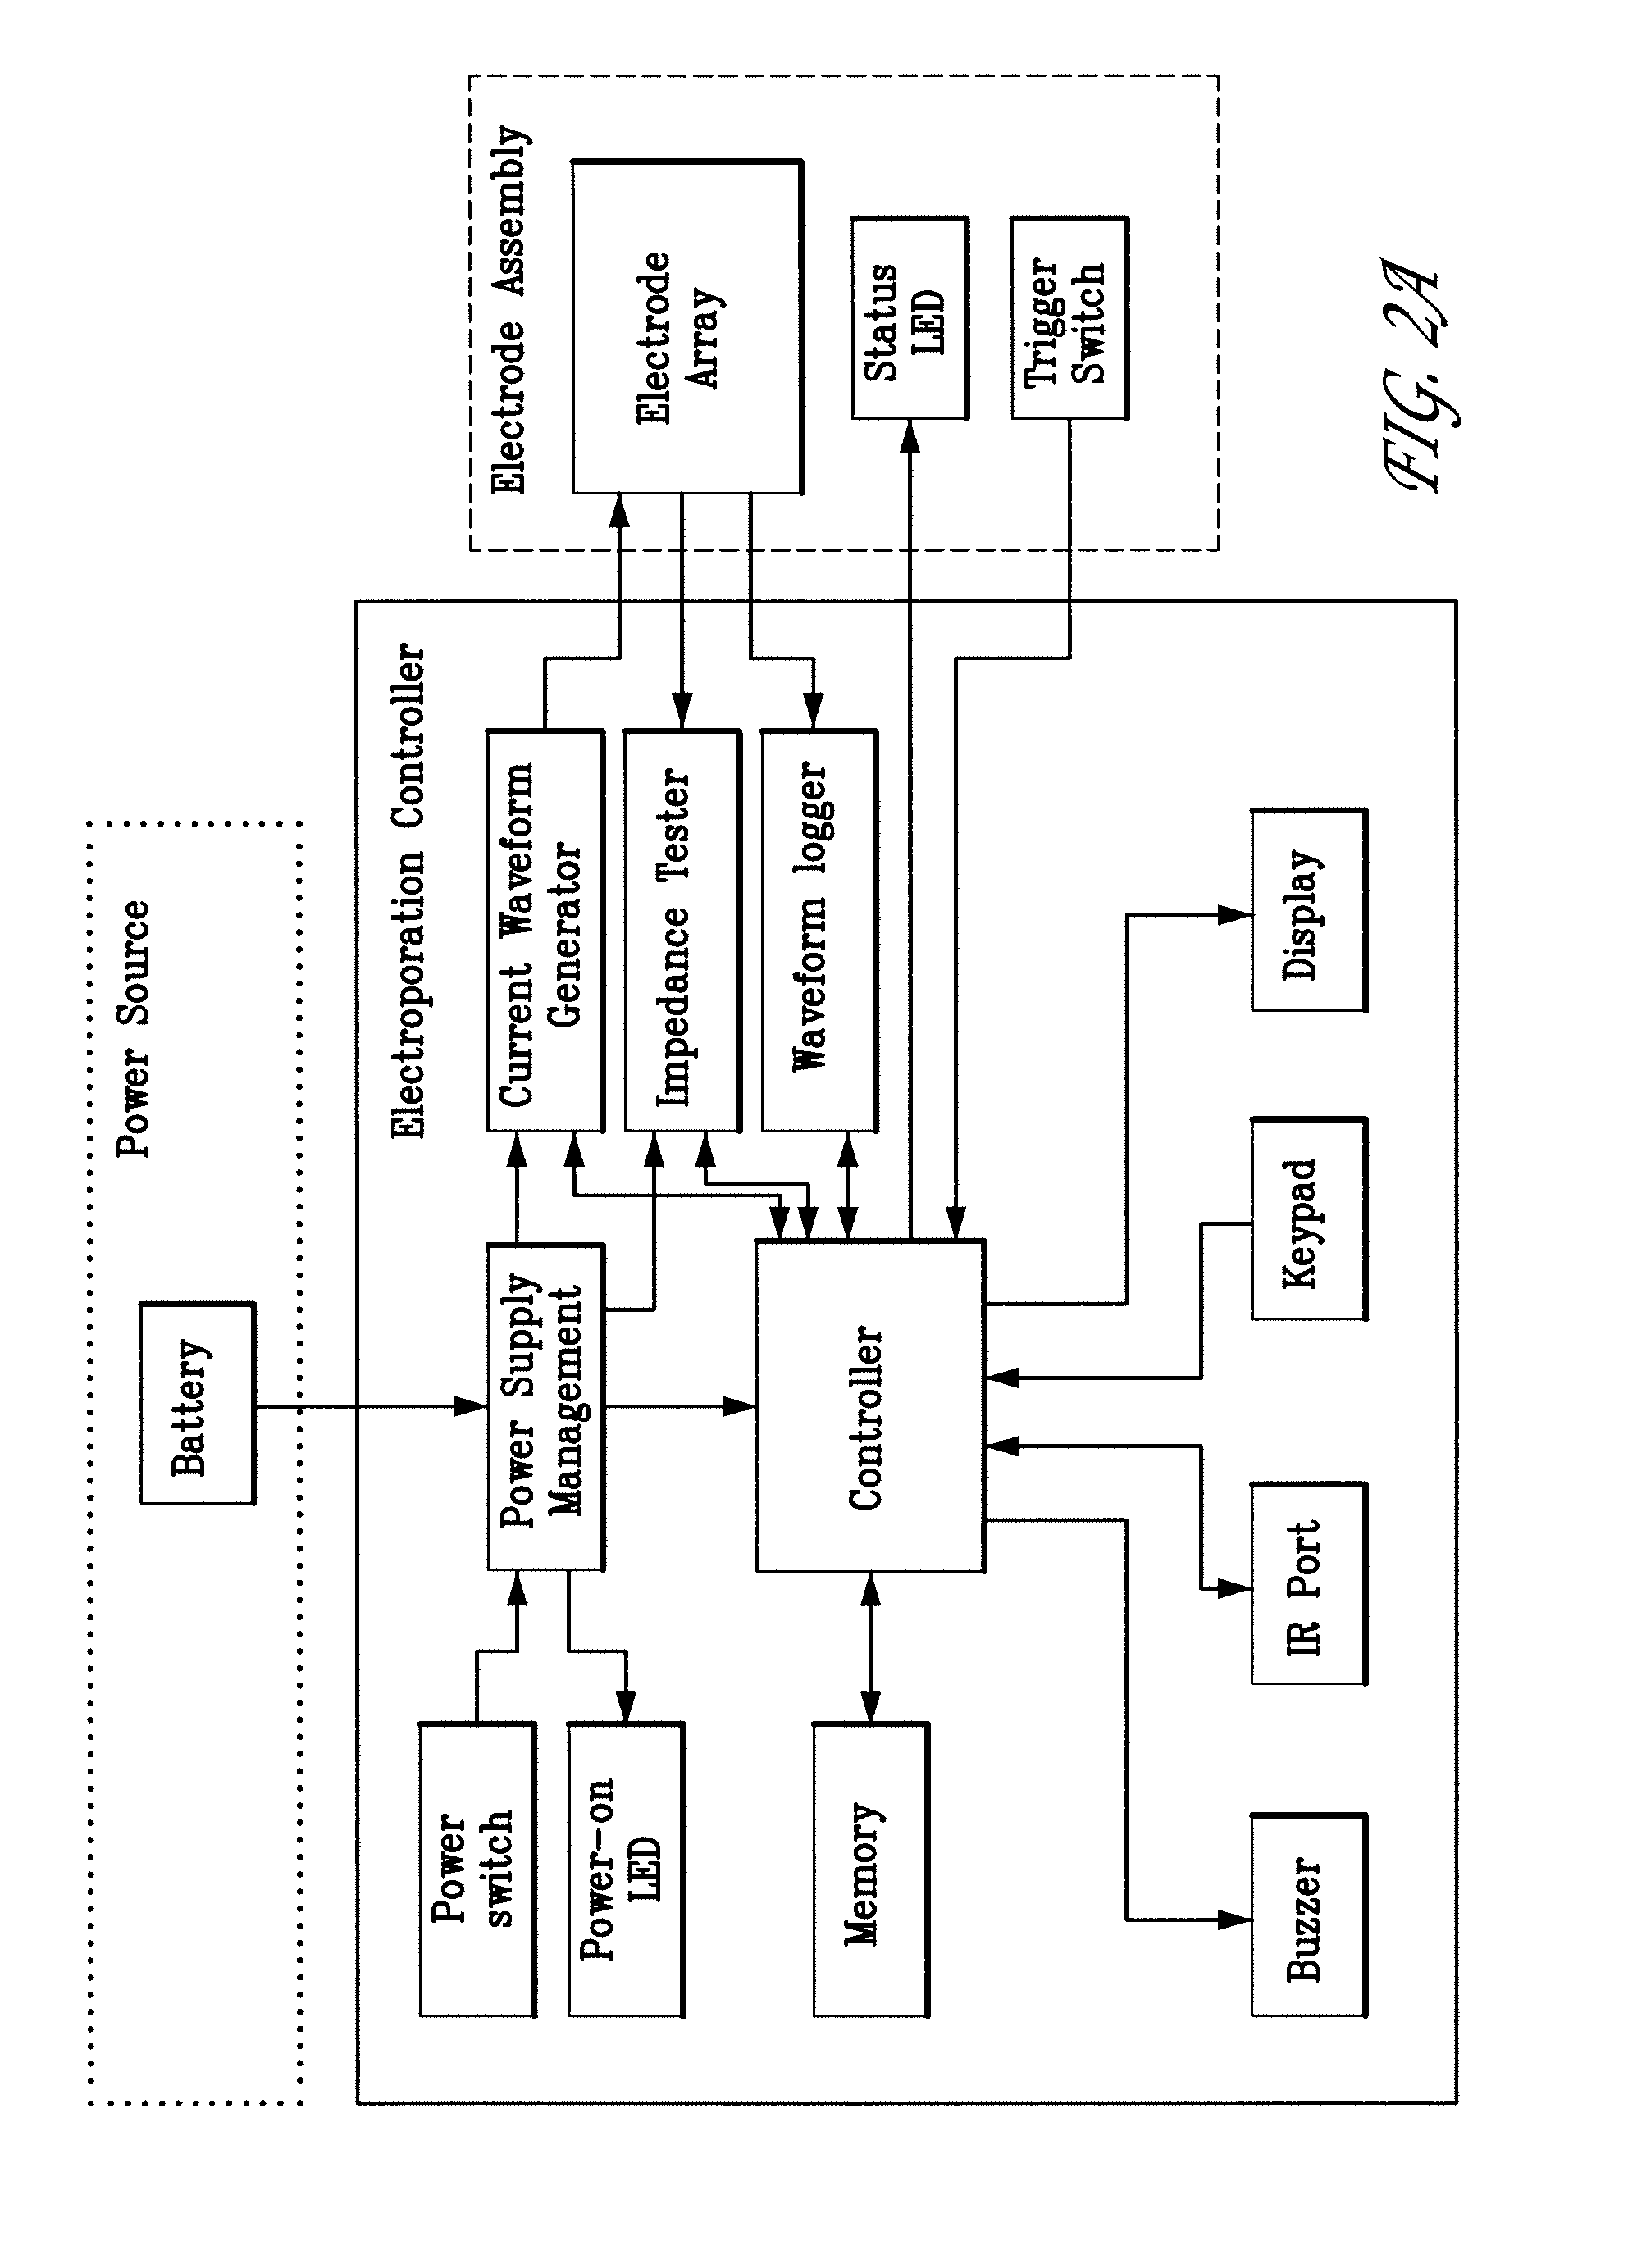 Electroporation devices and methods of using same for electroporation of cells in mammals